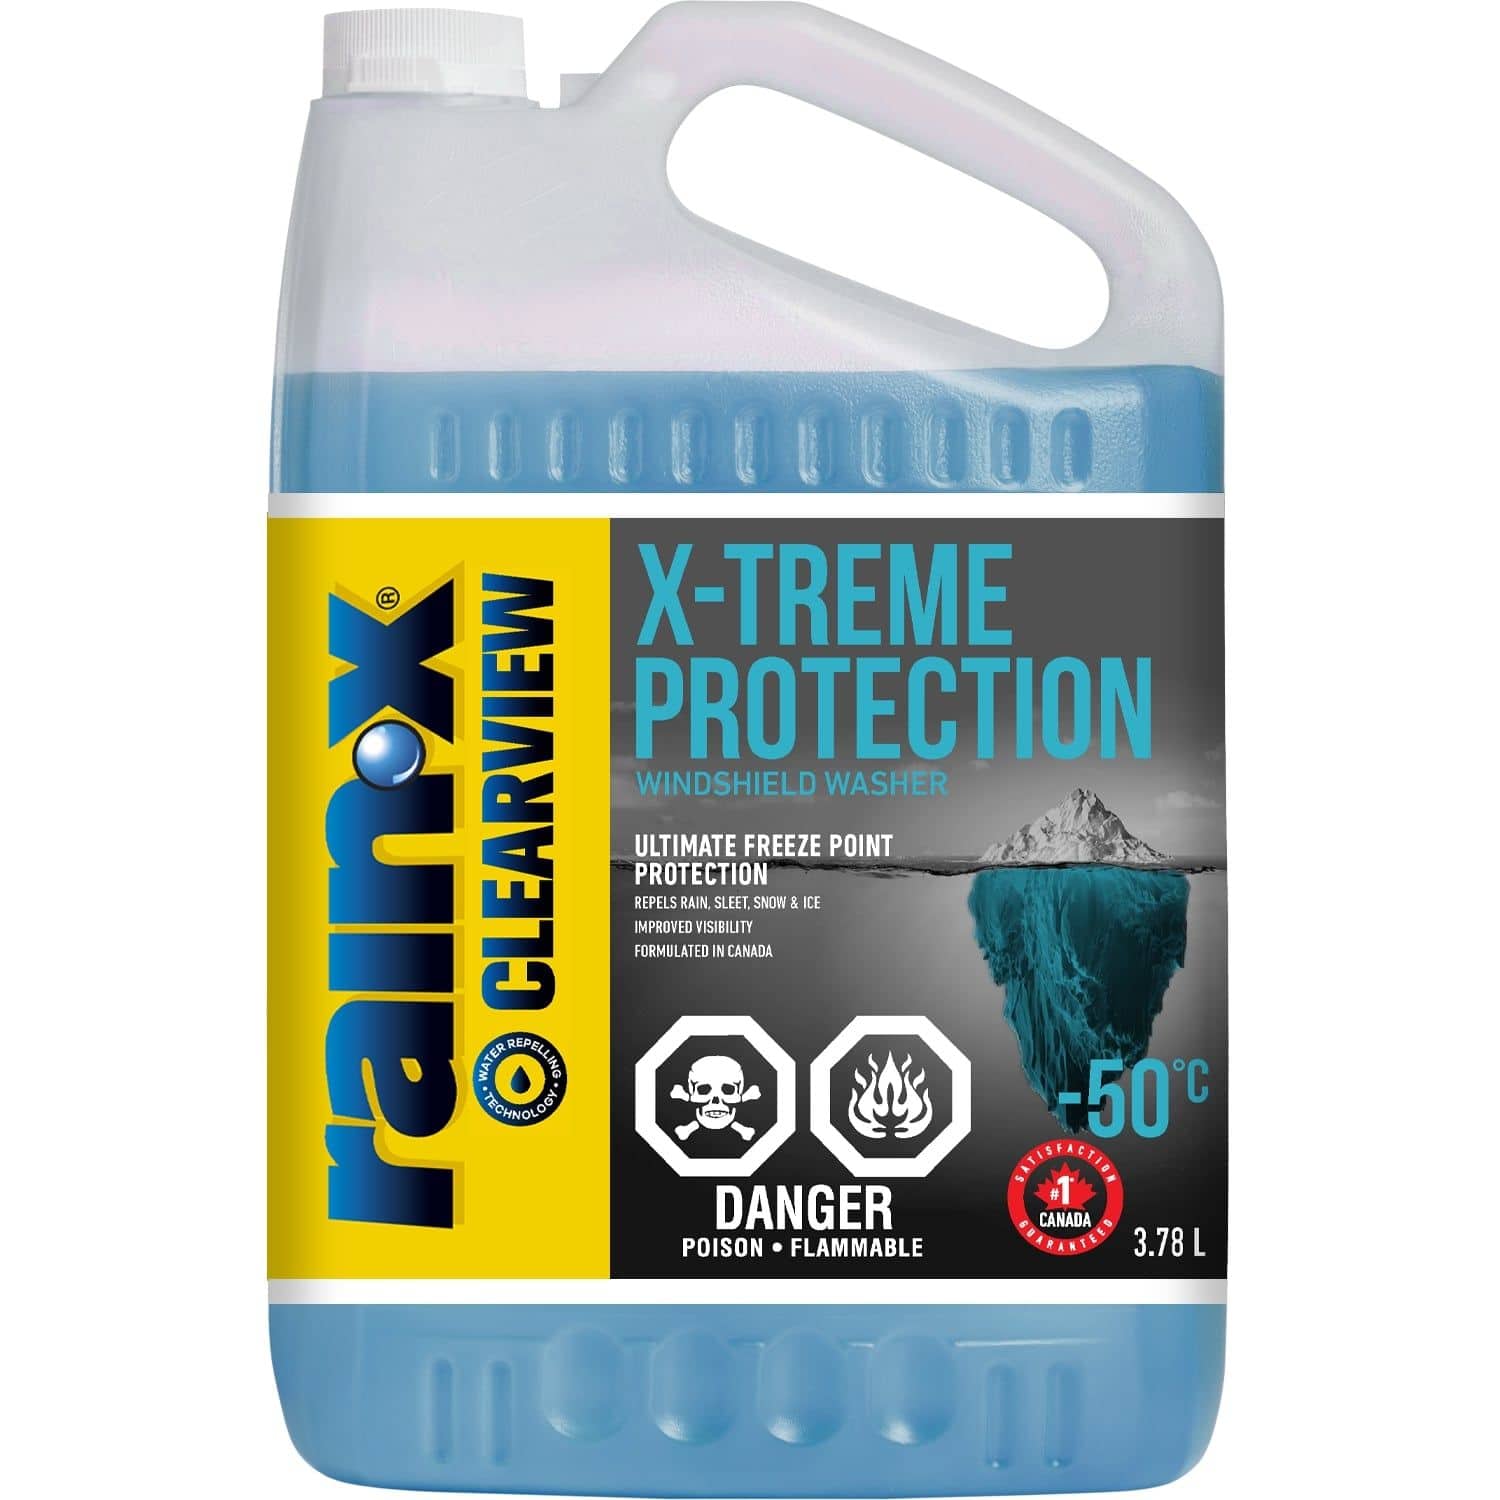 Rain-X ClearView - X-Treme Protection Windshield Washer Fluid